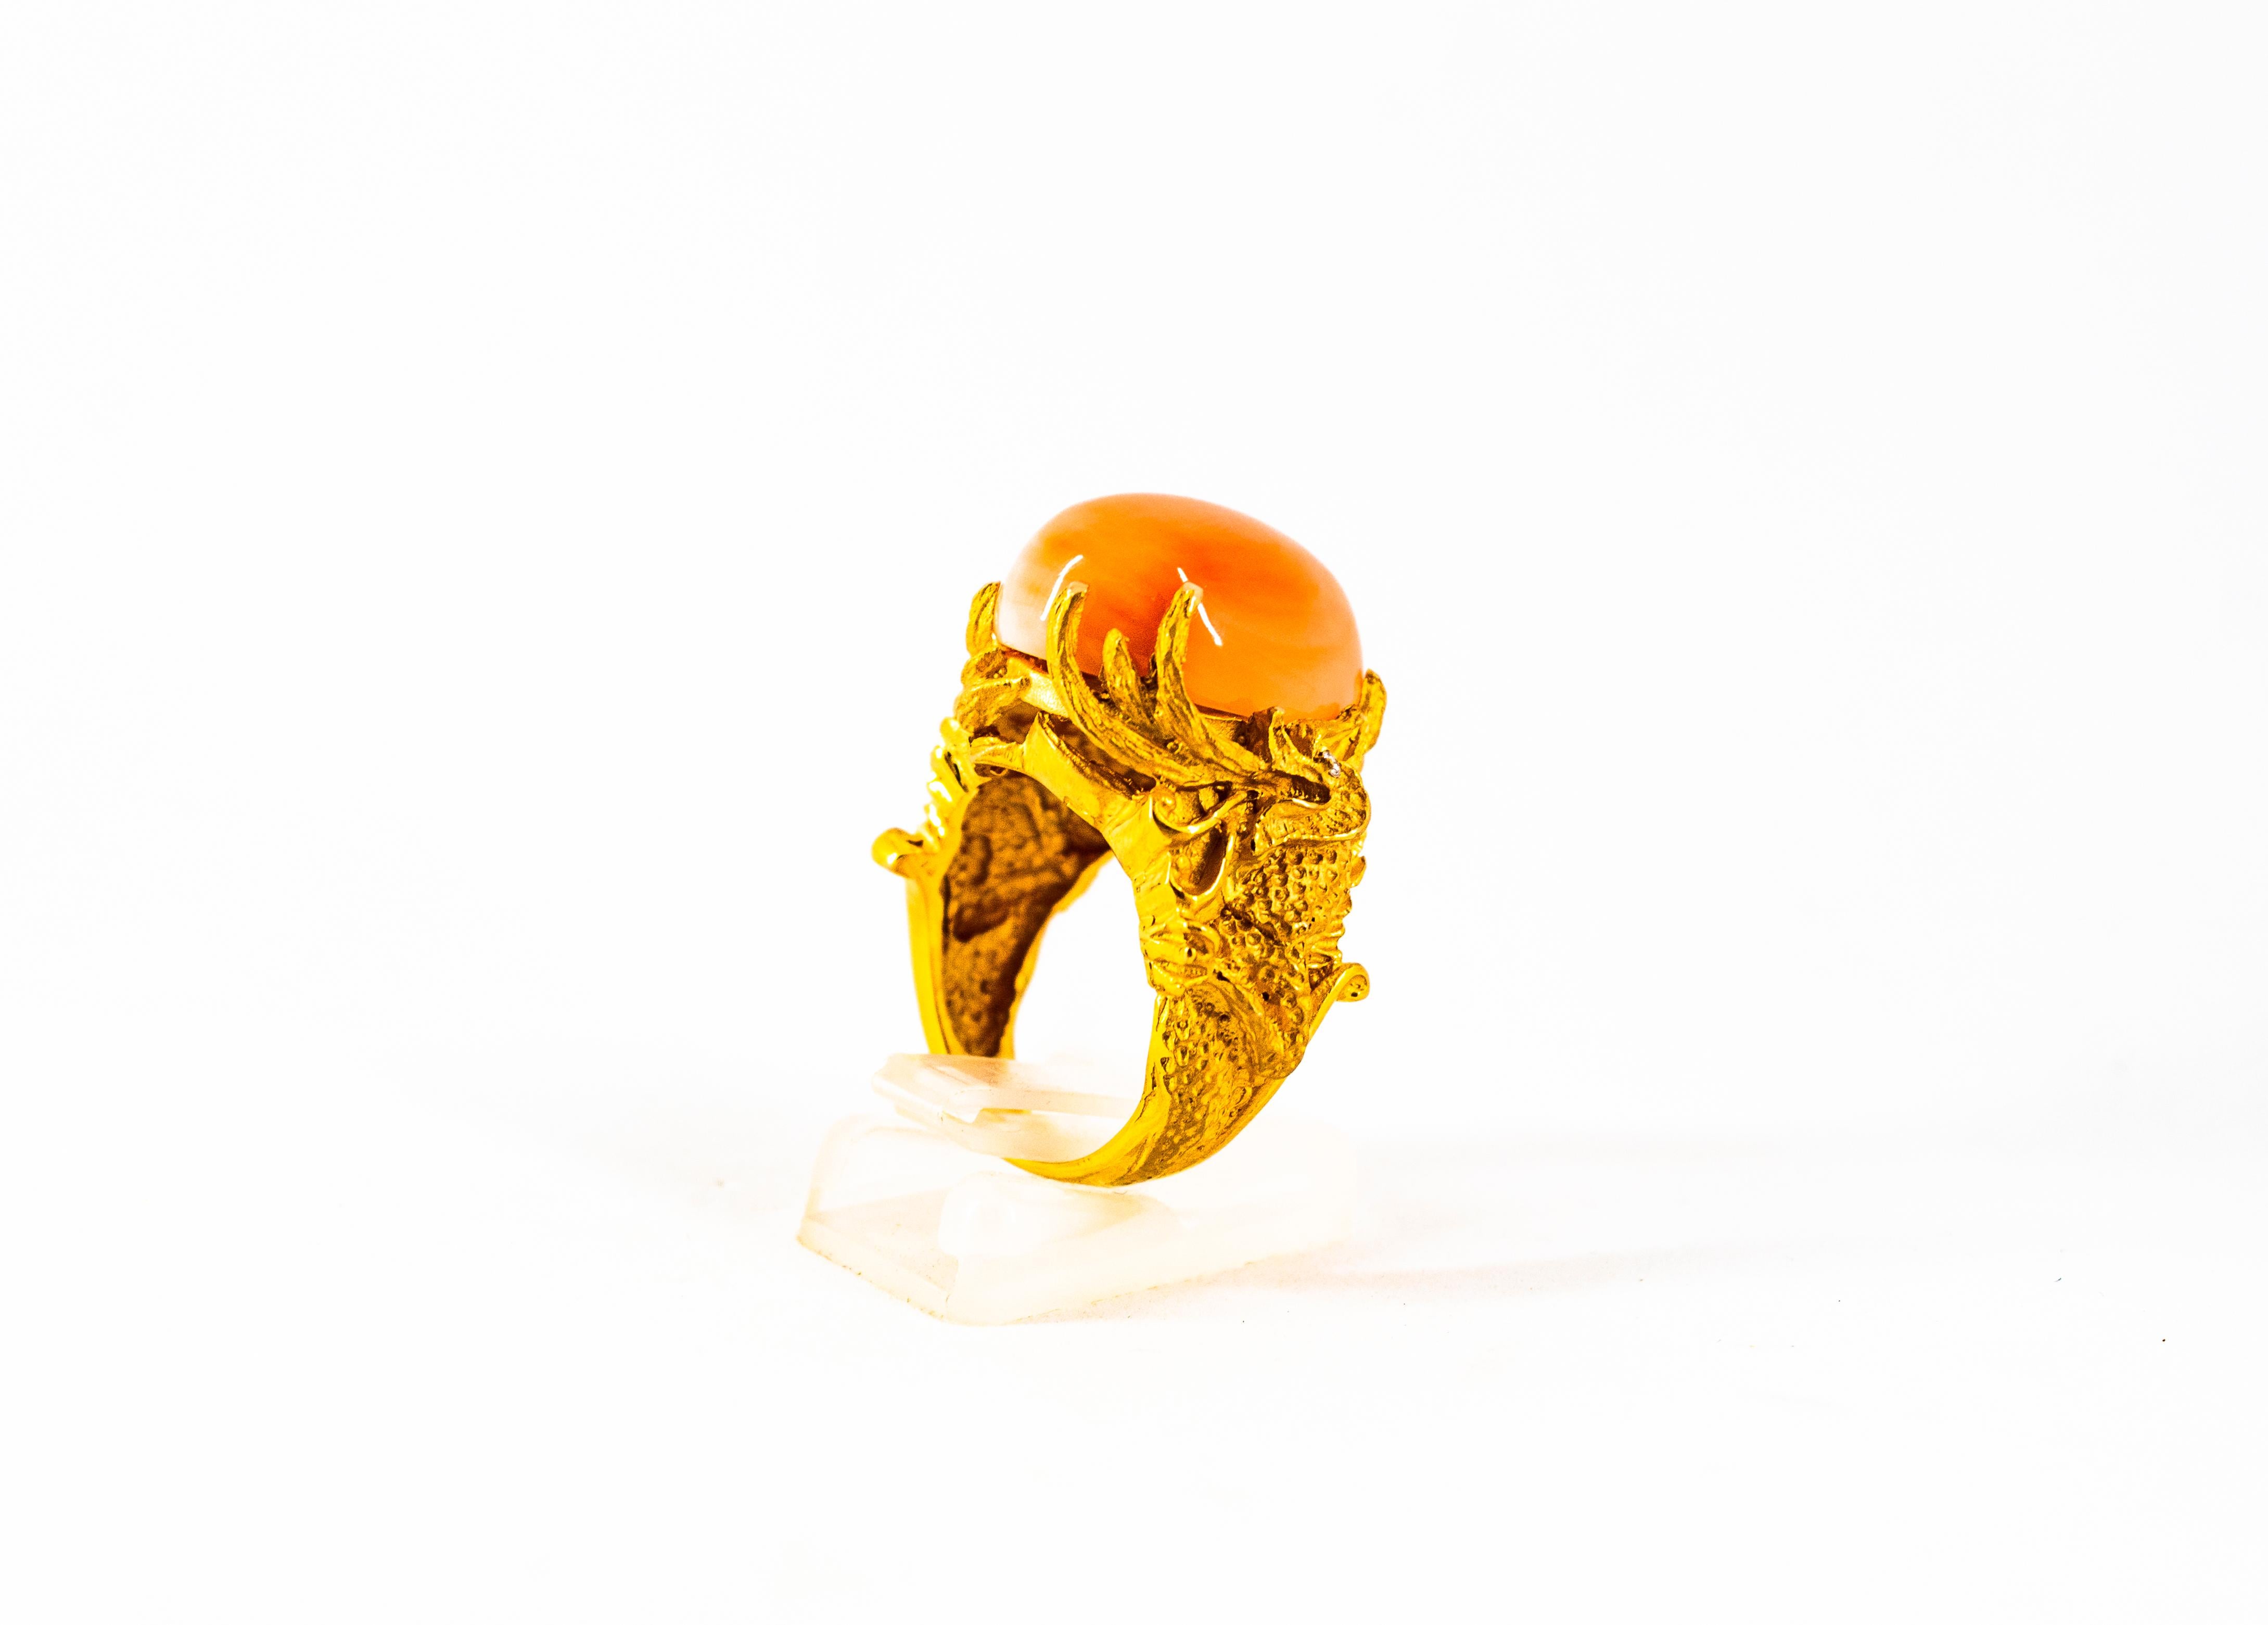 21.52 Carat Cabochon Pink Coral White Diamond Yellow Gold Dragons Cocktail Ring For Sale 1